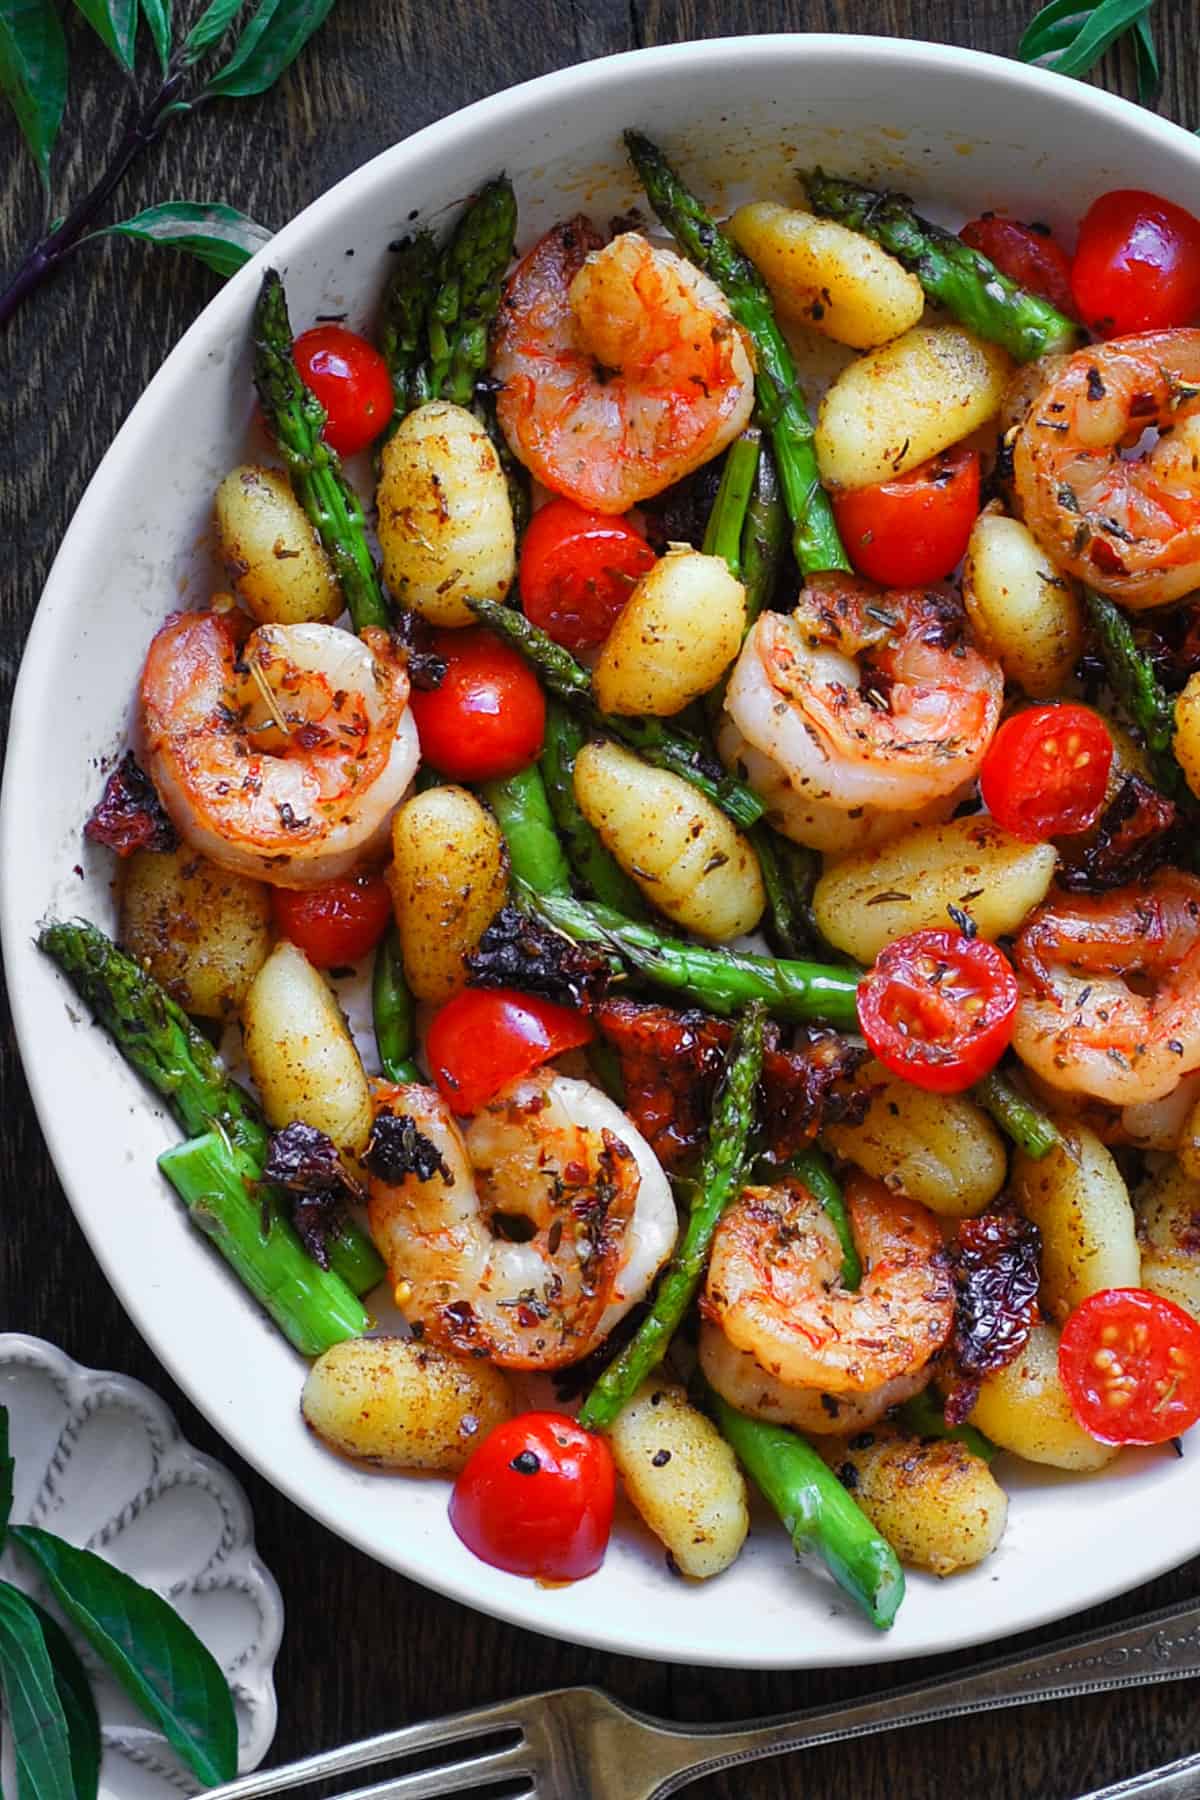 Shrimp Gnocchi with Asparagus, Sun-Dried Tomatoes, Cherry Tomatoes - in a white bowl.